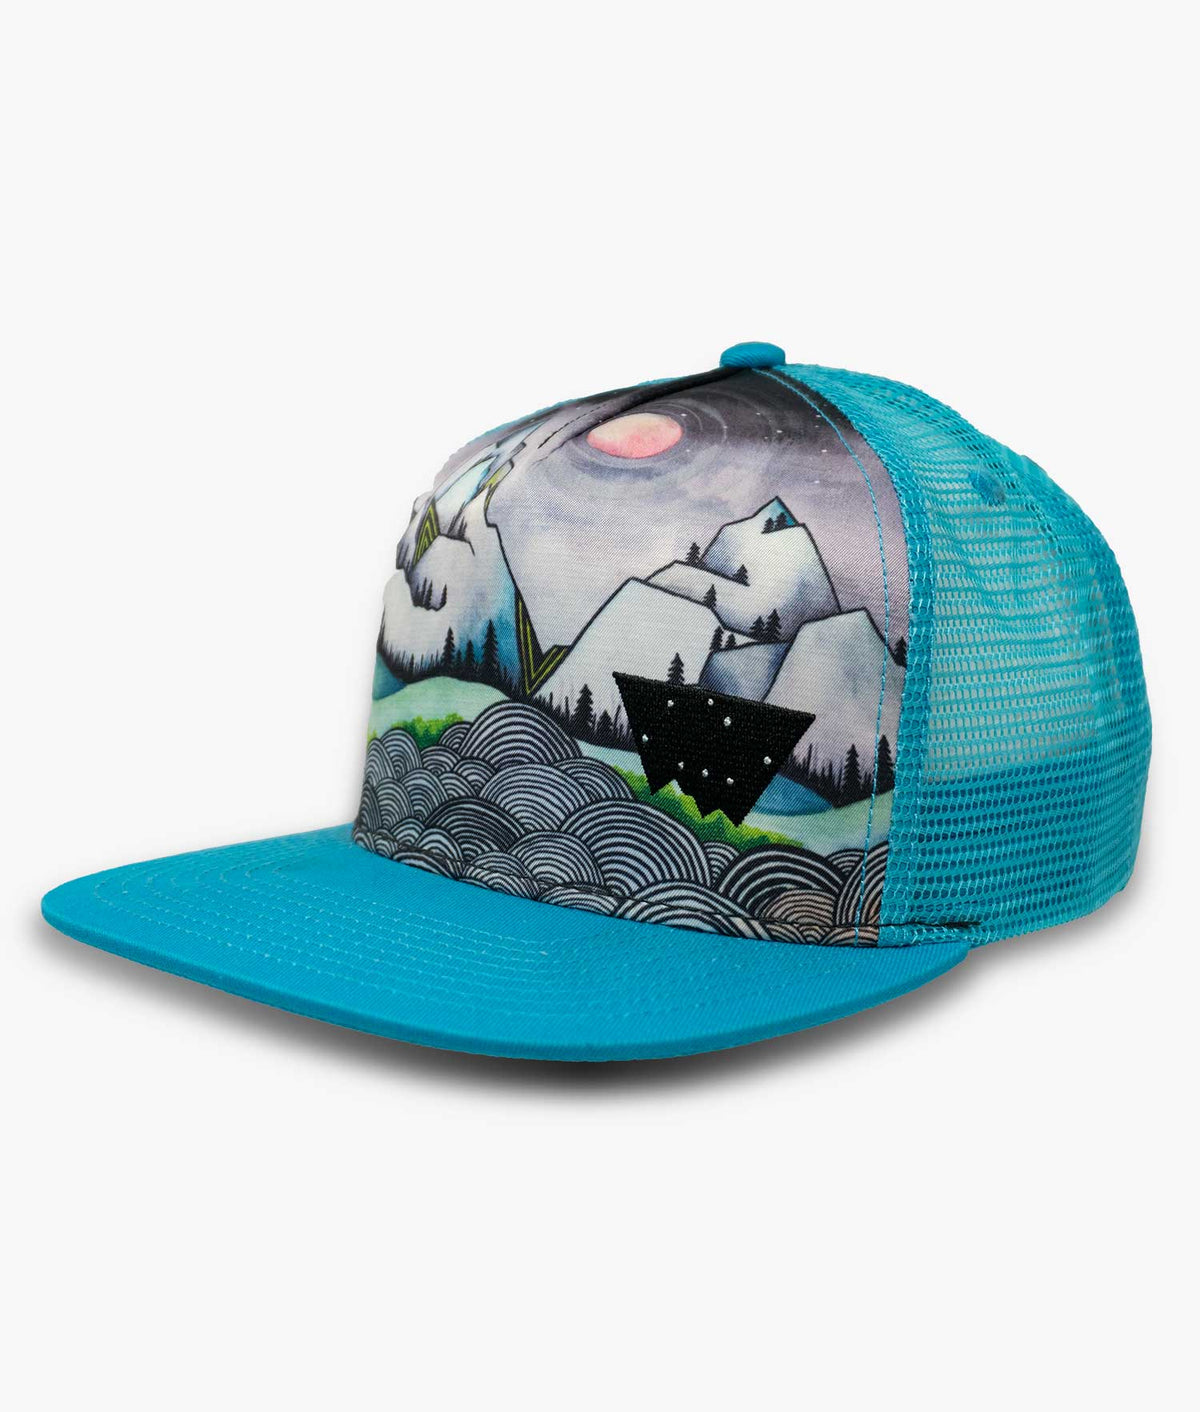 Kids Flat Bill Trucker Snap Back Hat with Bright Blue Mesh and Bill featuring Elise Holme's Watercolor Painting of the Minaret Mountain Range